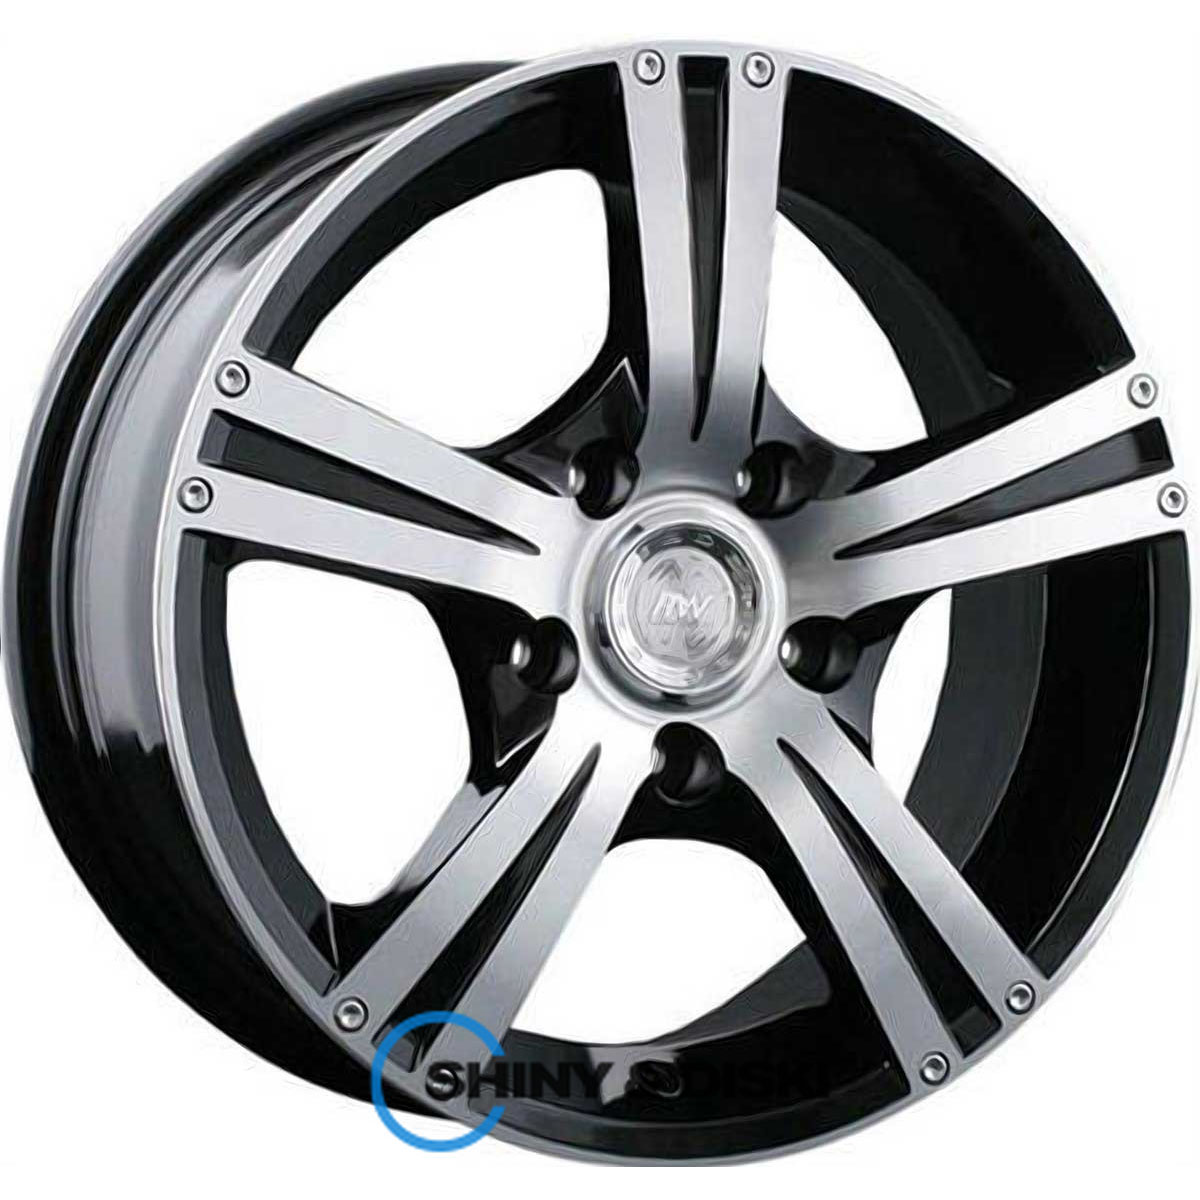 rs tuning h-326 bkfp r16 w6.5 pcd5x114.3 et40 dia67.1